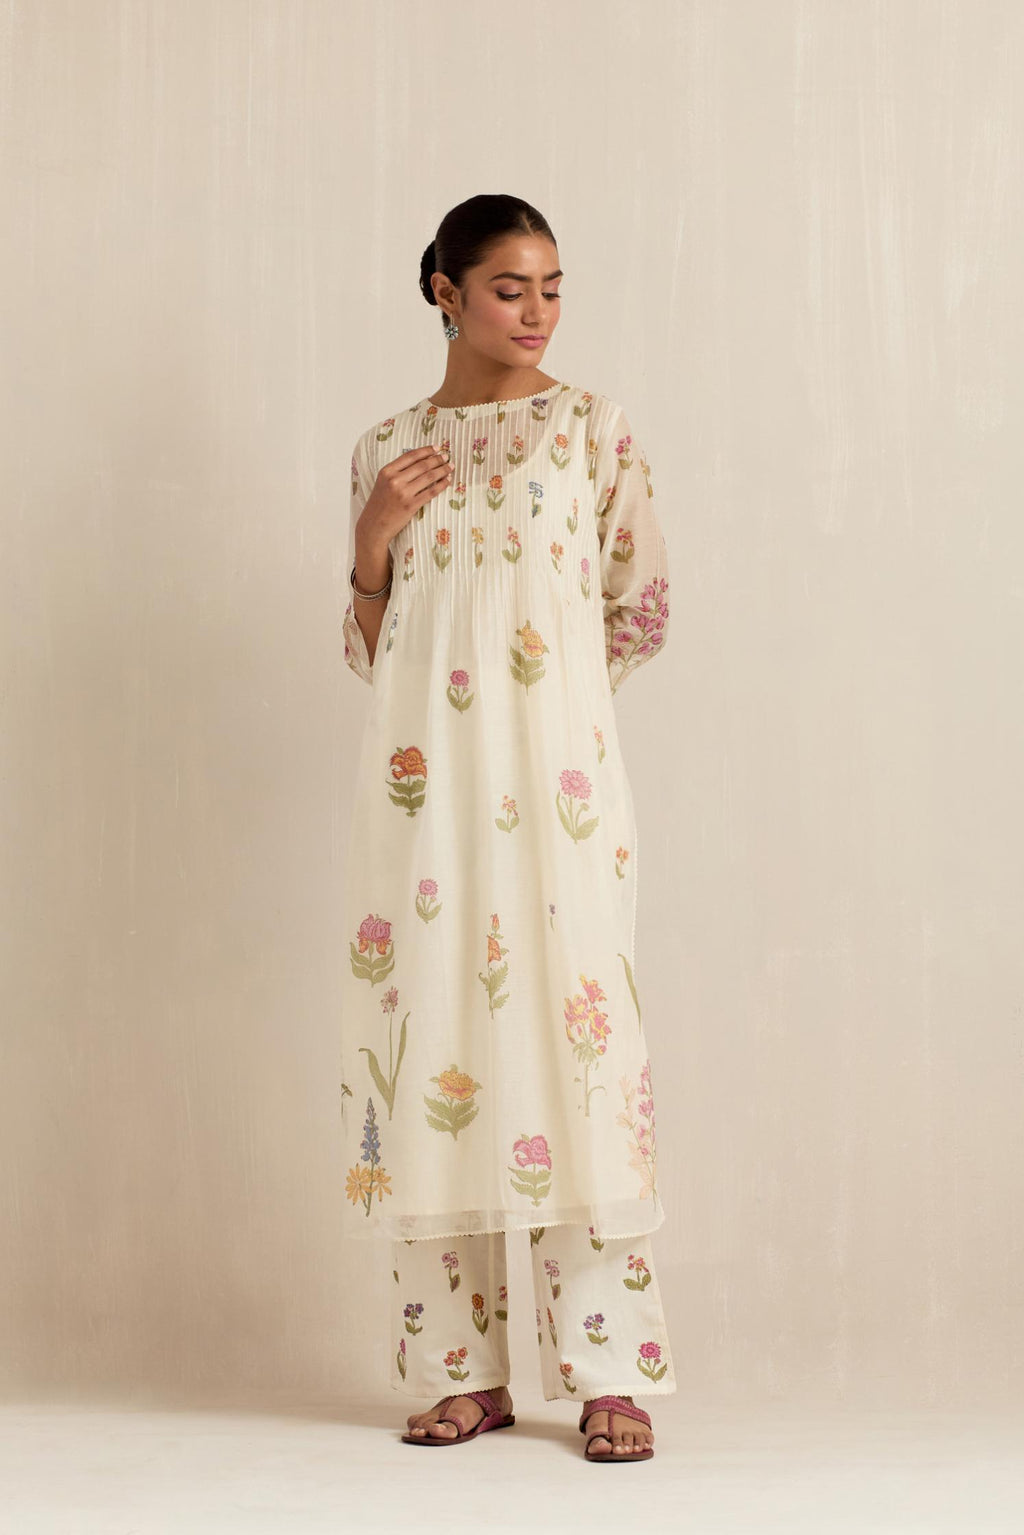 Off white cotton chanderi hand block printed kurta set with pin tucks at yoke and all-over multi colored flower.